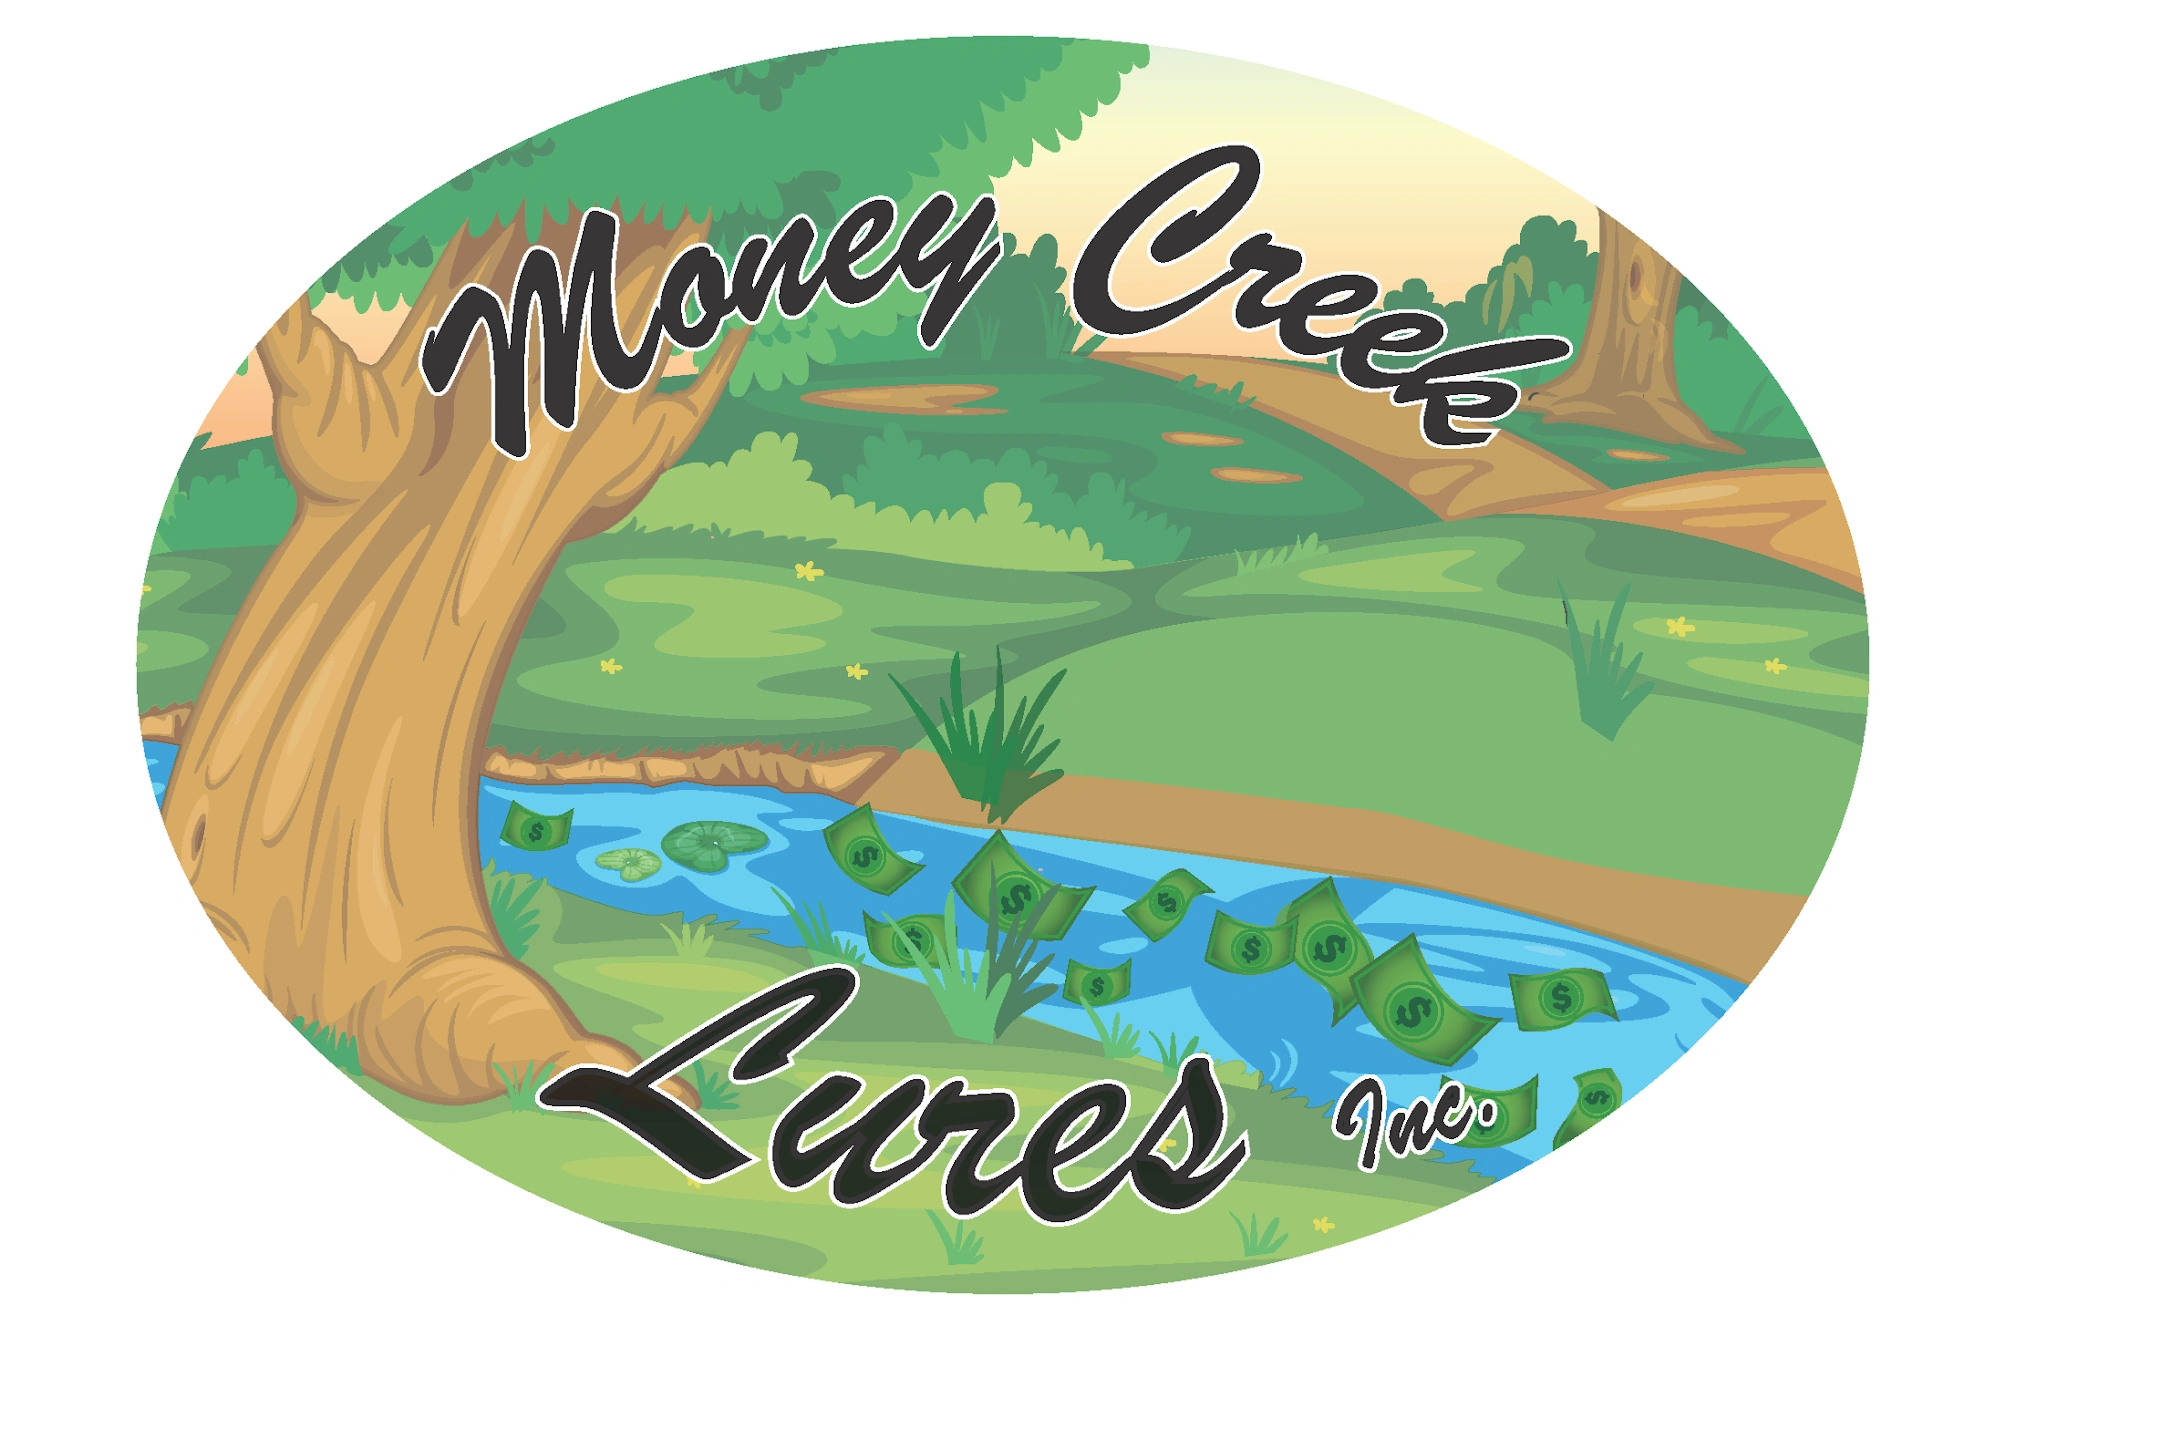 Money Creek Lures Inc - Spinnerbaits, Fishing Lures, Bass